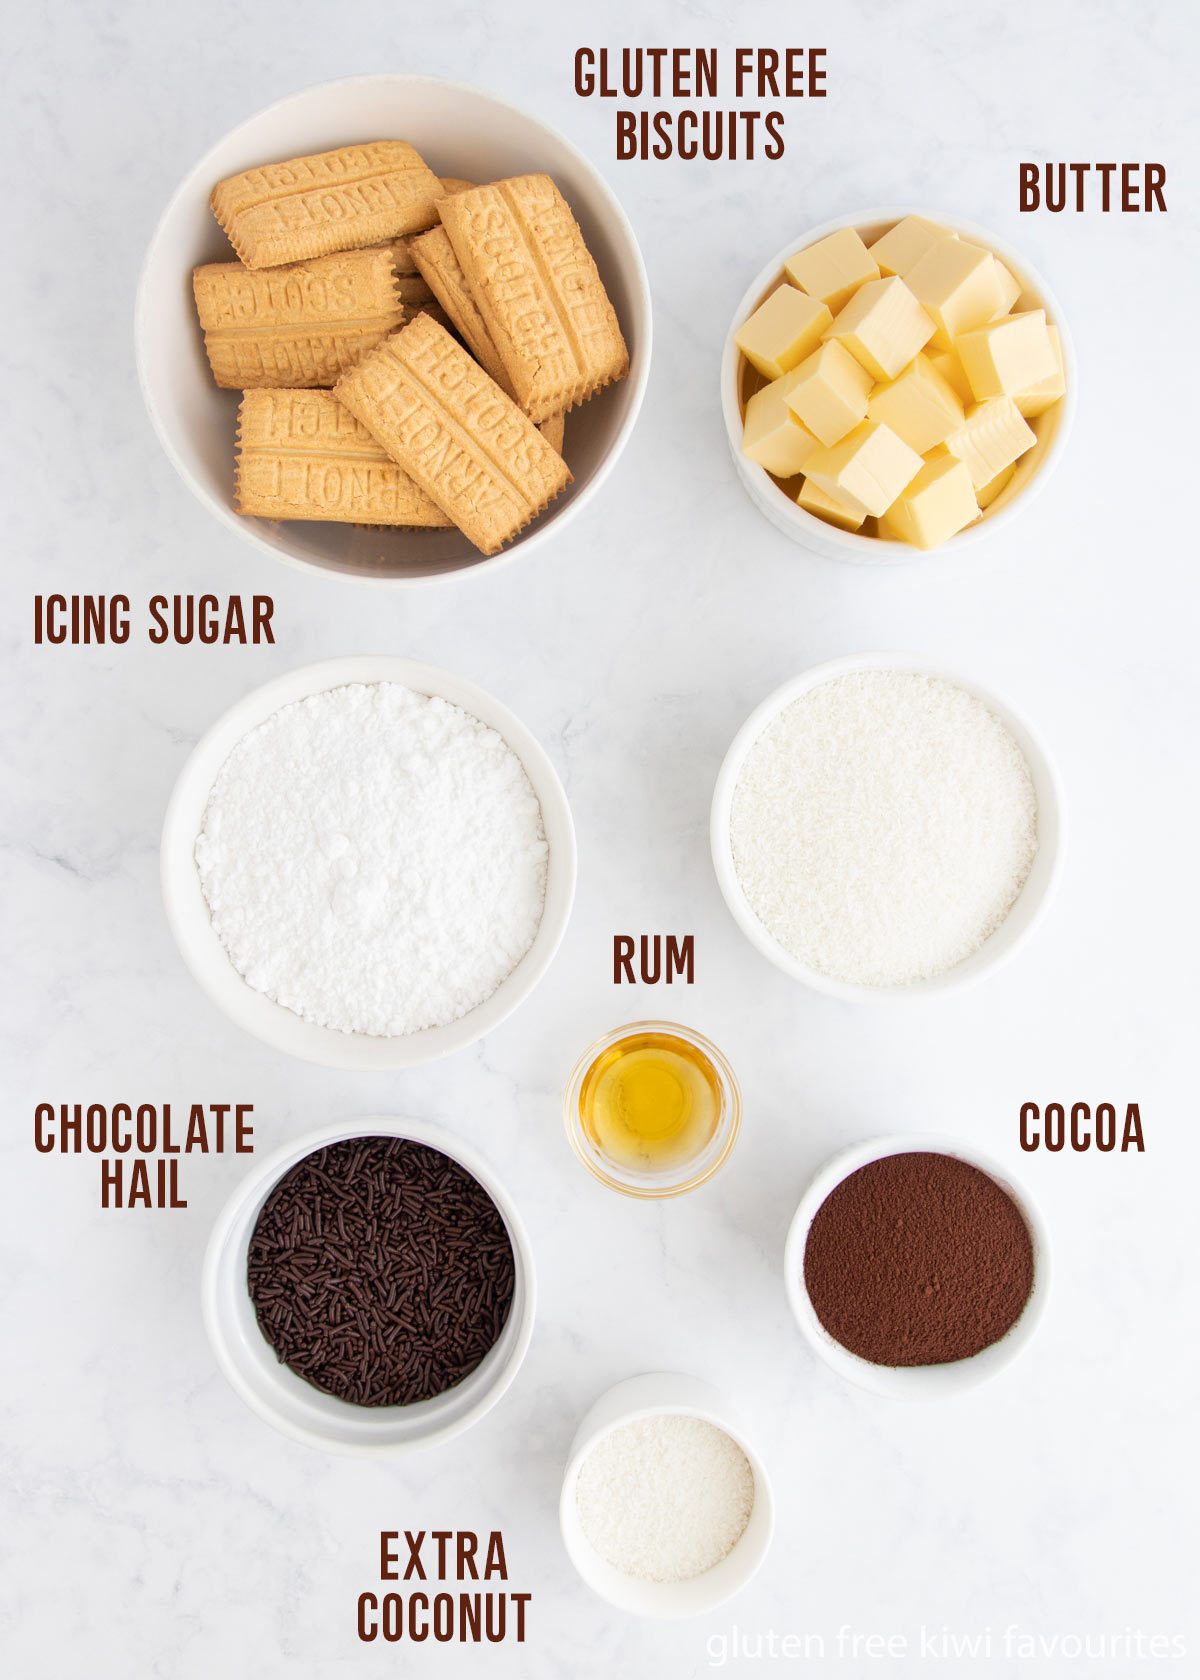 All rum ball ingredients in separate white bowls.